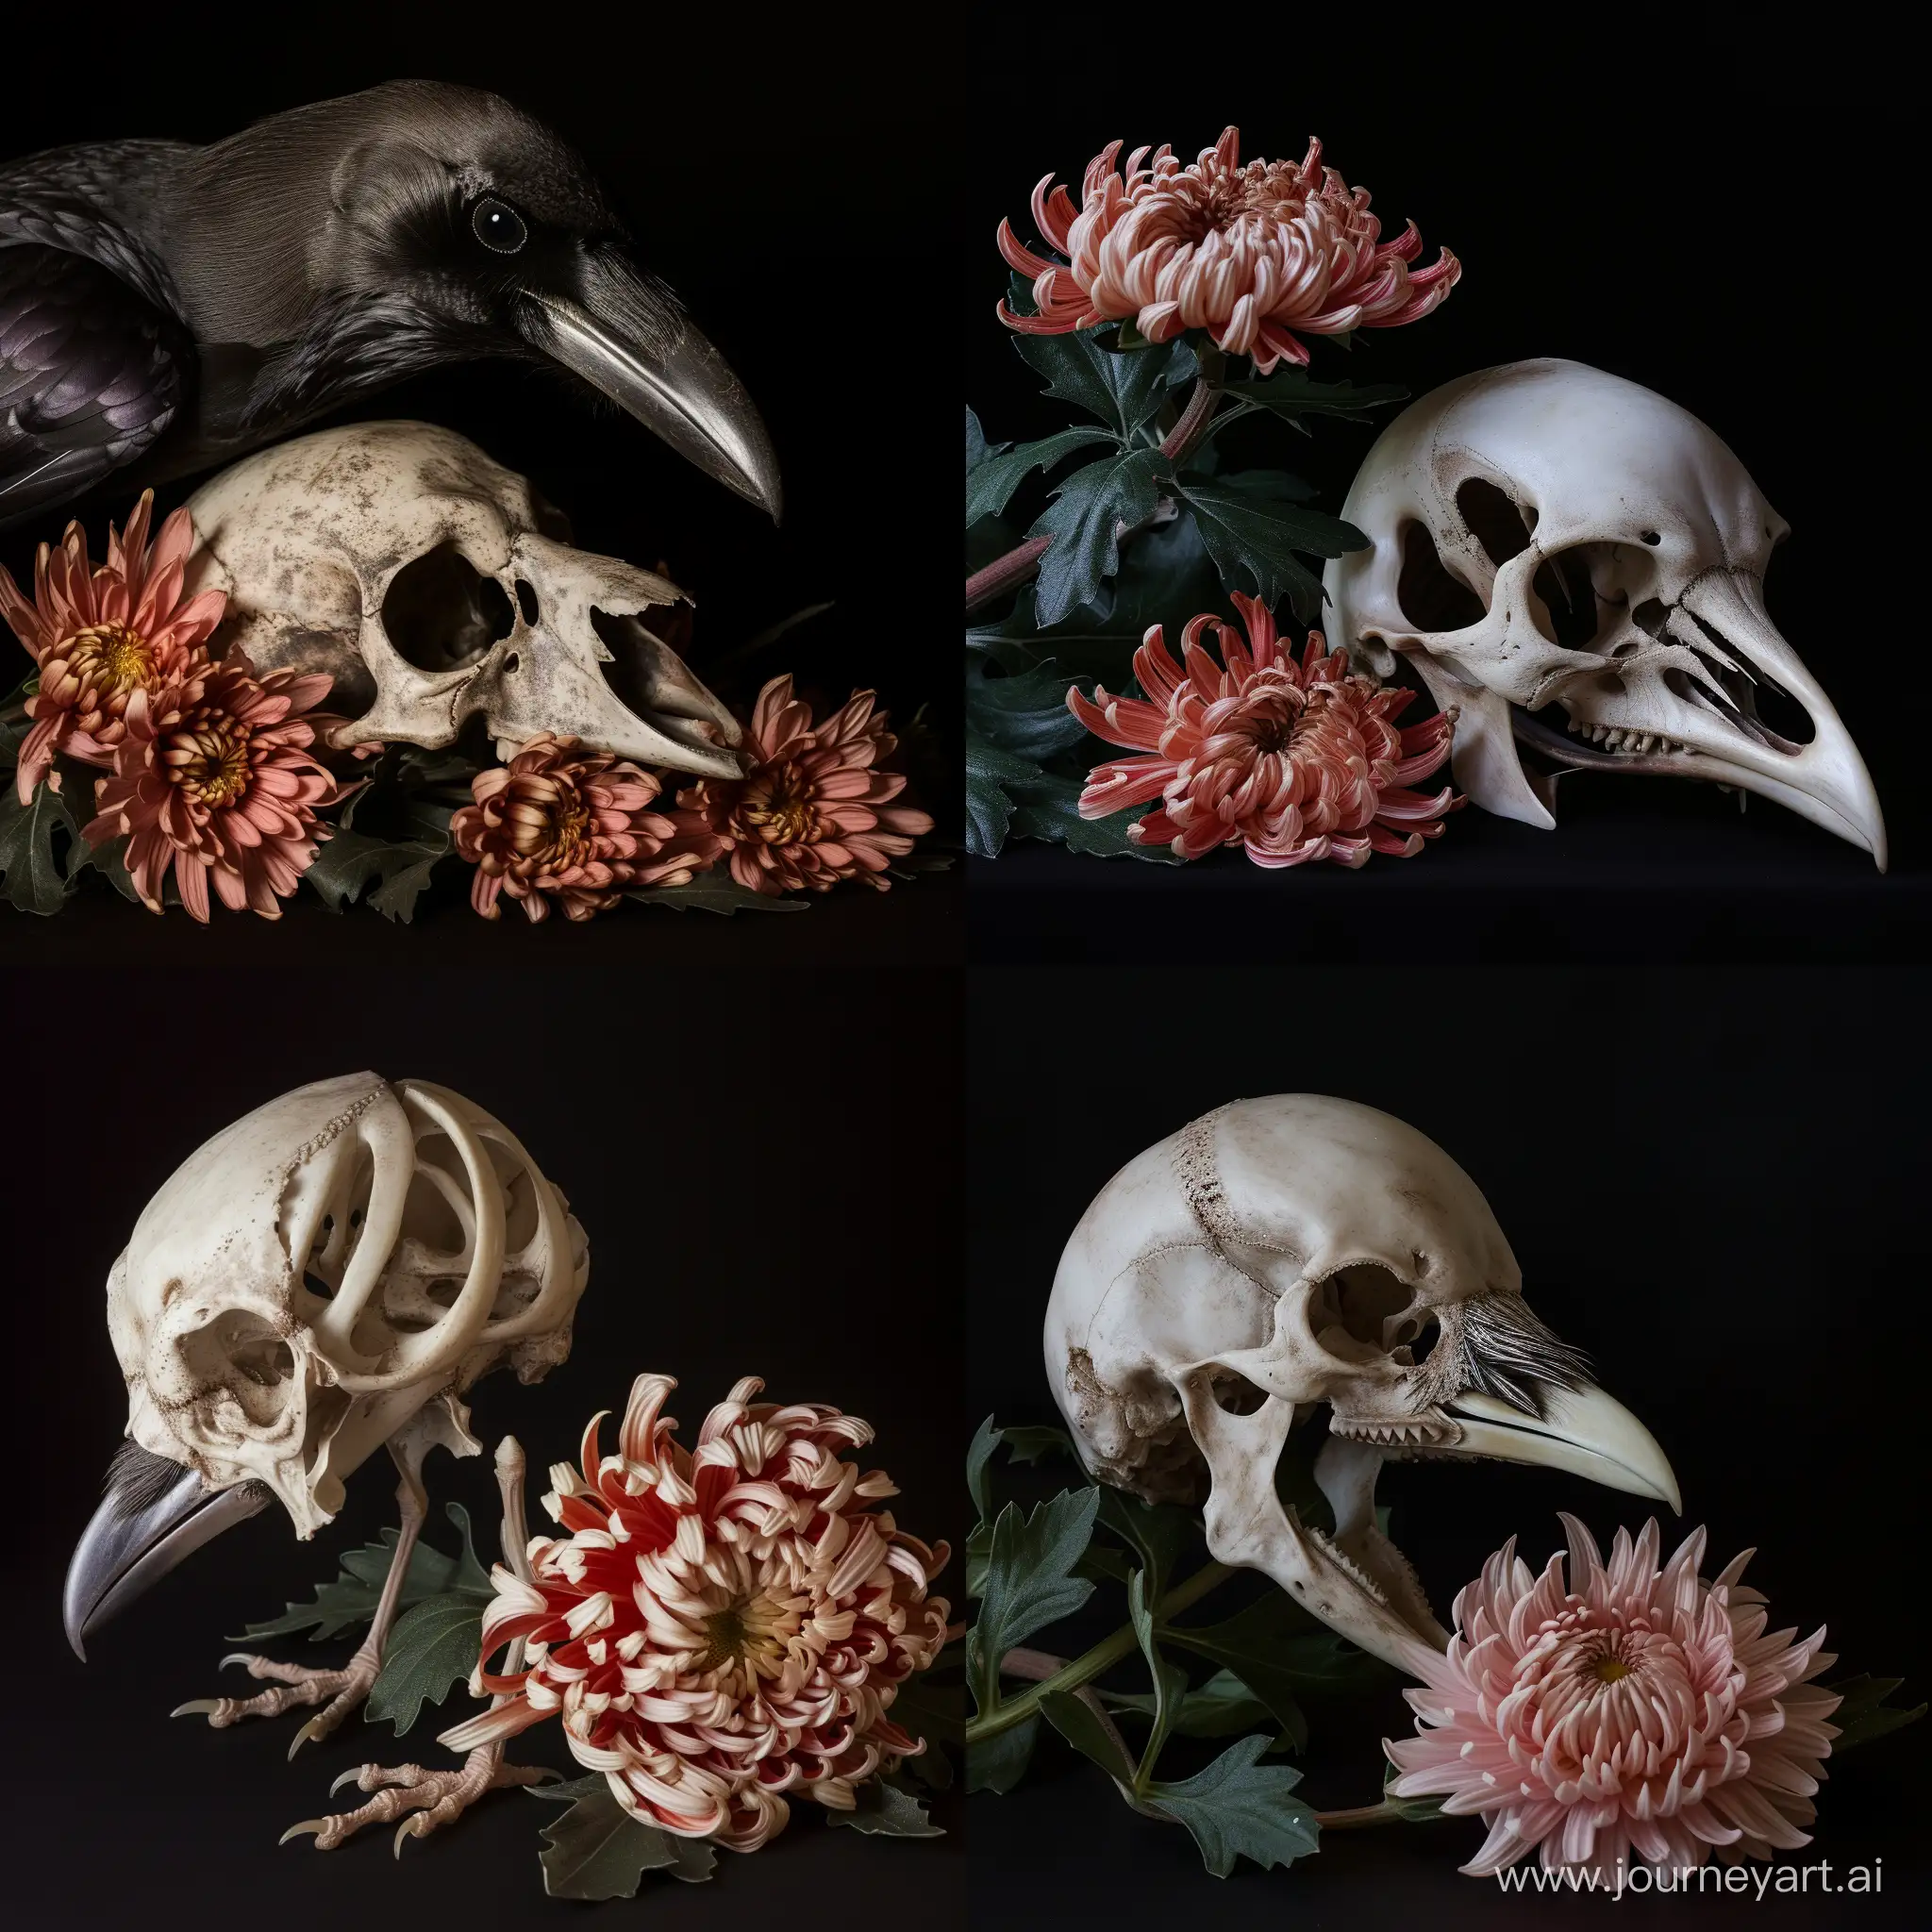 Ethereal-Crow-Skull-and-Chrysanthemum-Captured-in-Stunning-34-Perspective-Photograph